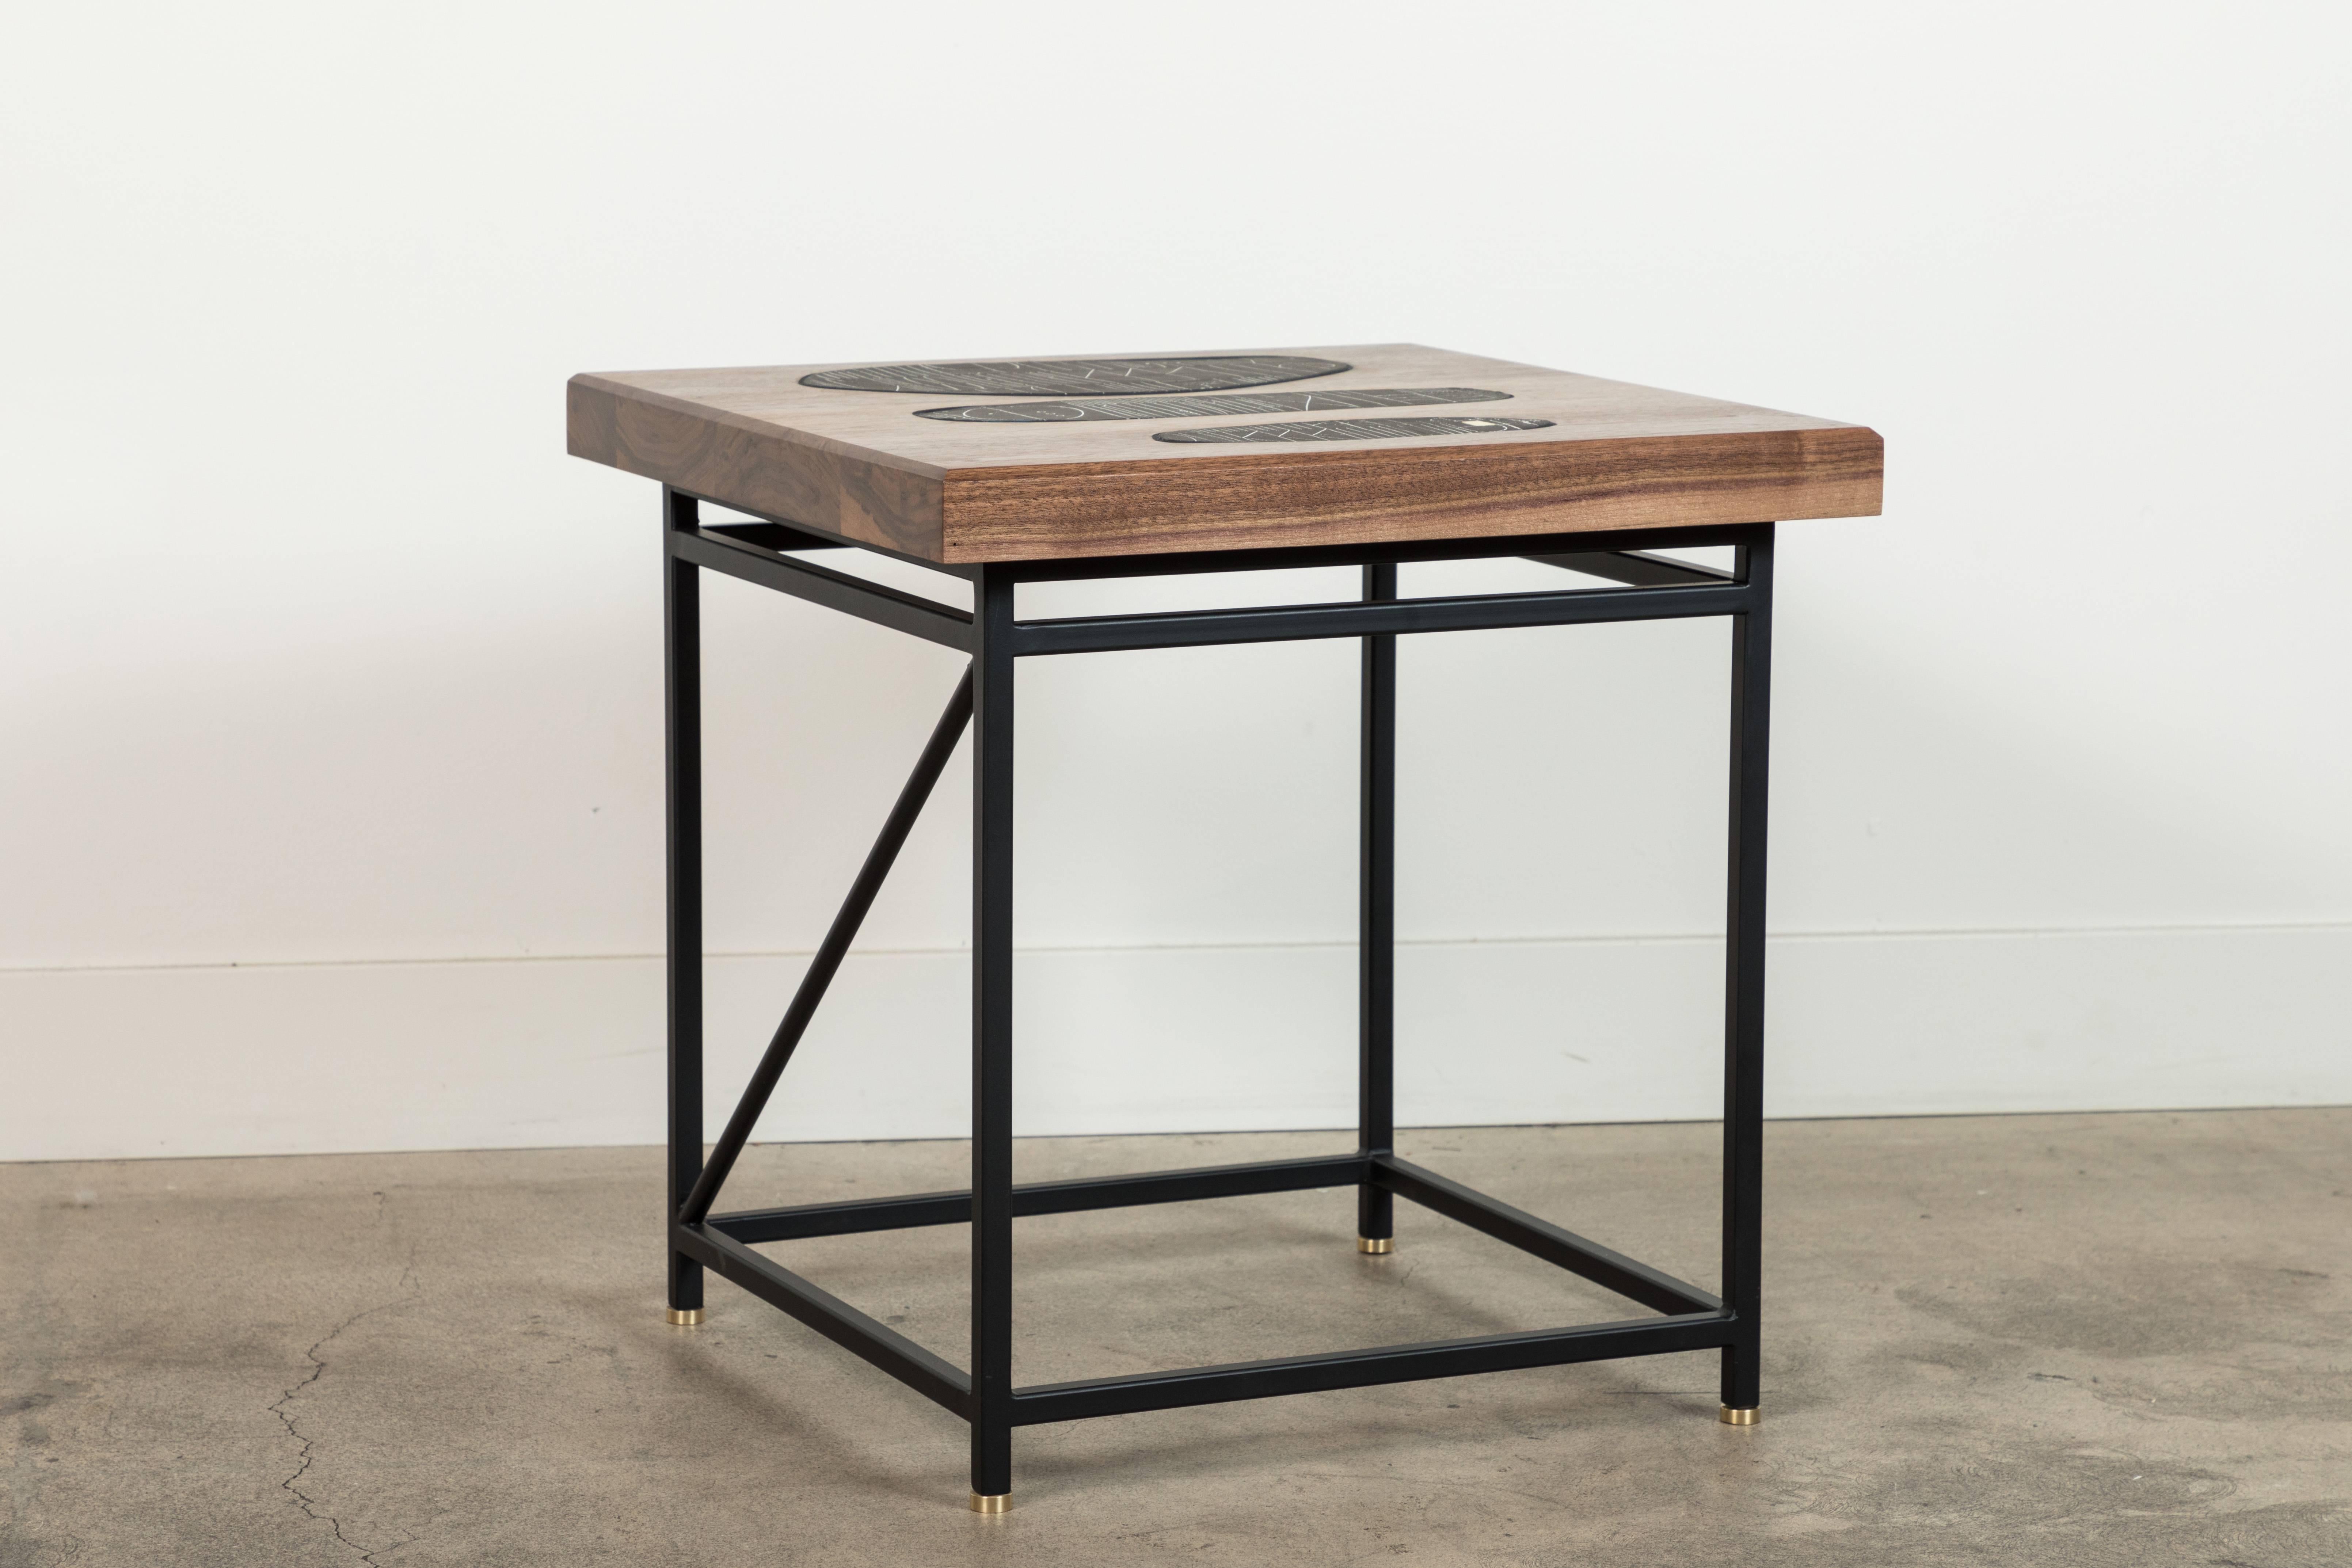 American Solid Walnut and Ceramic Side Table by Heather Rosenman for Collabs in Clay